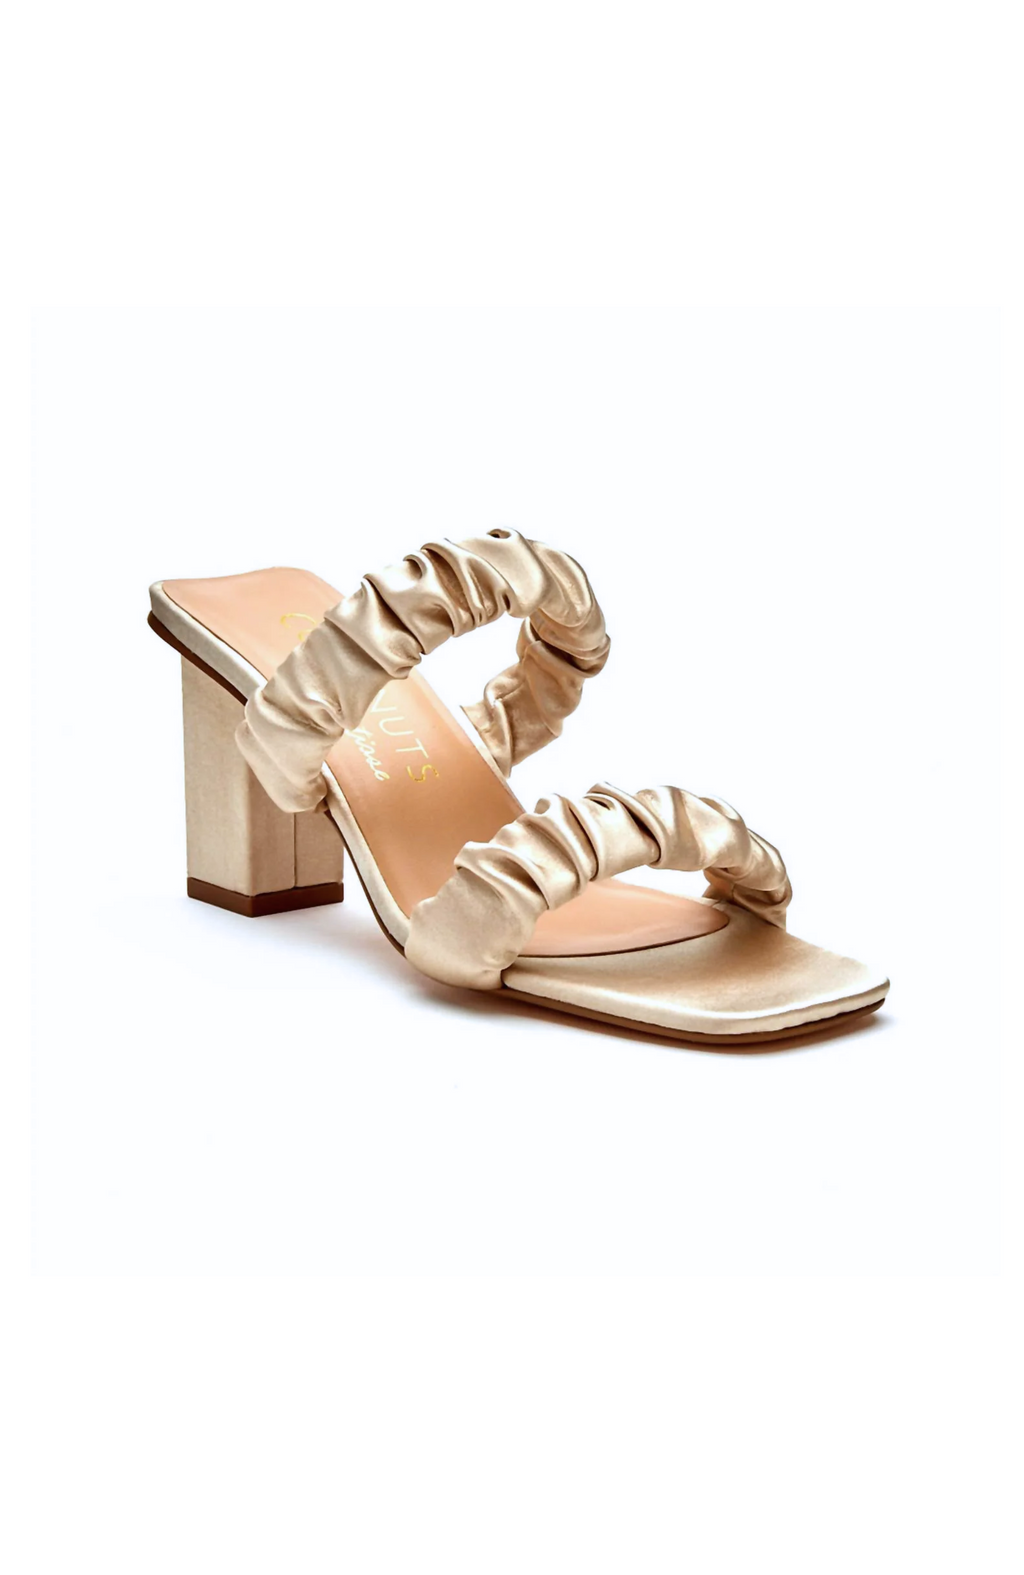 Matisse - First Love Champagne Heeled Sandal